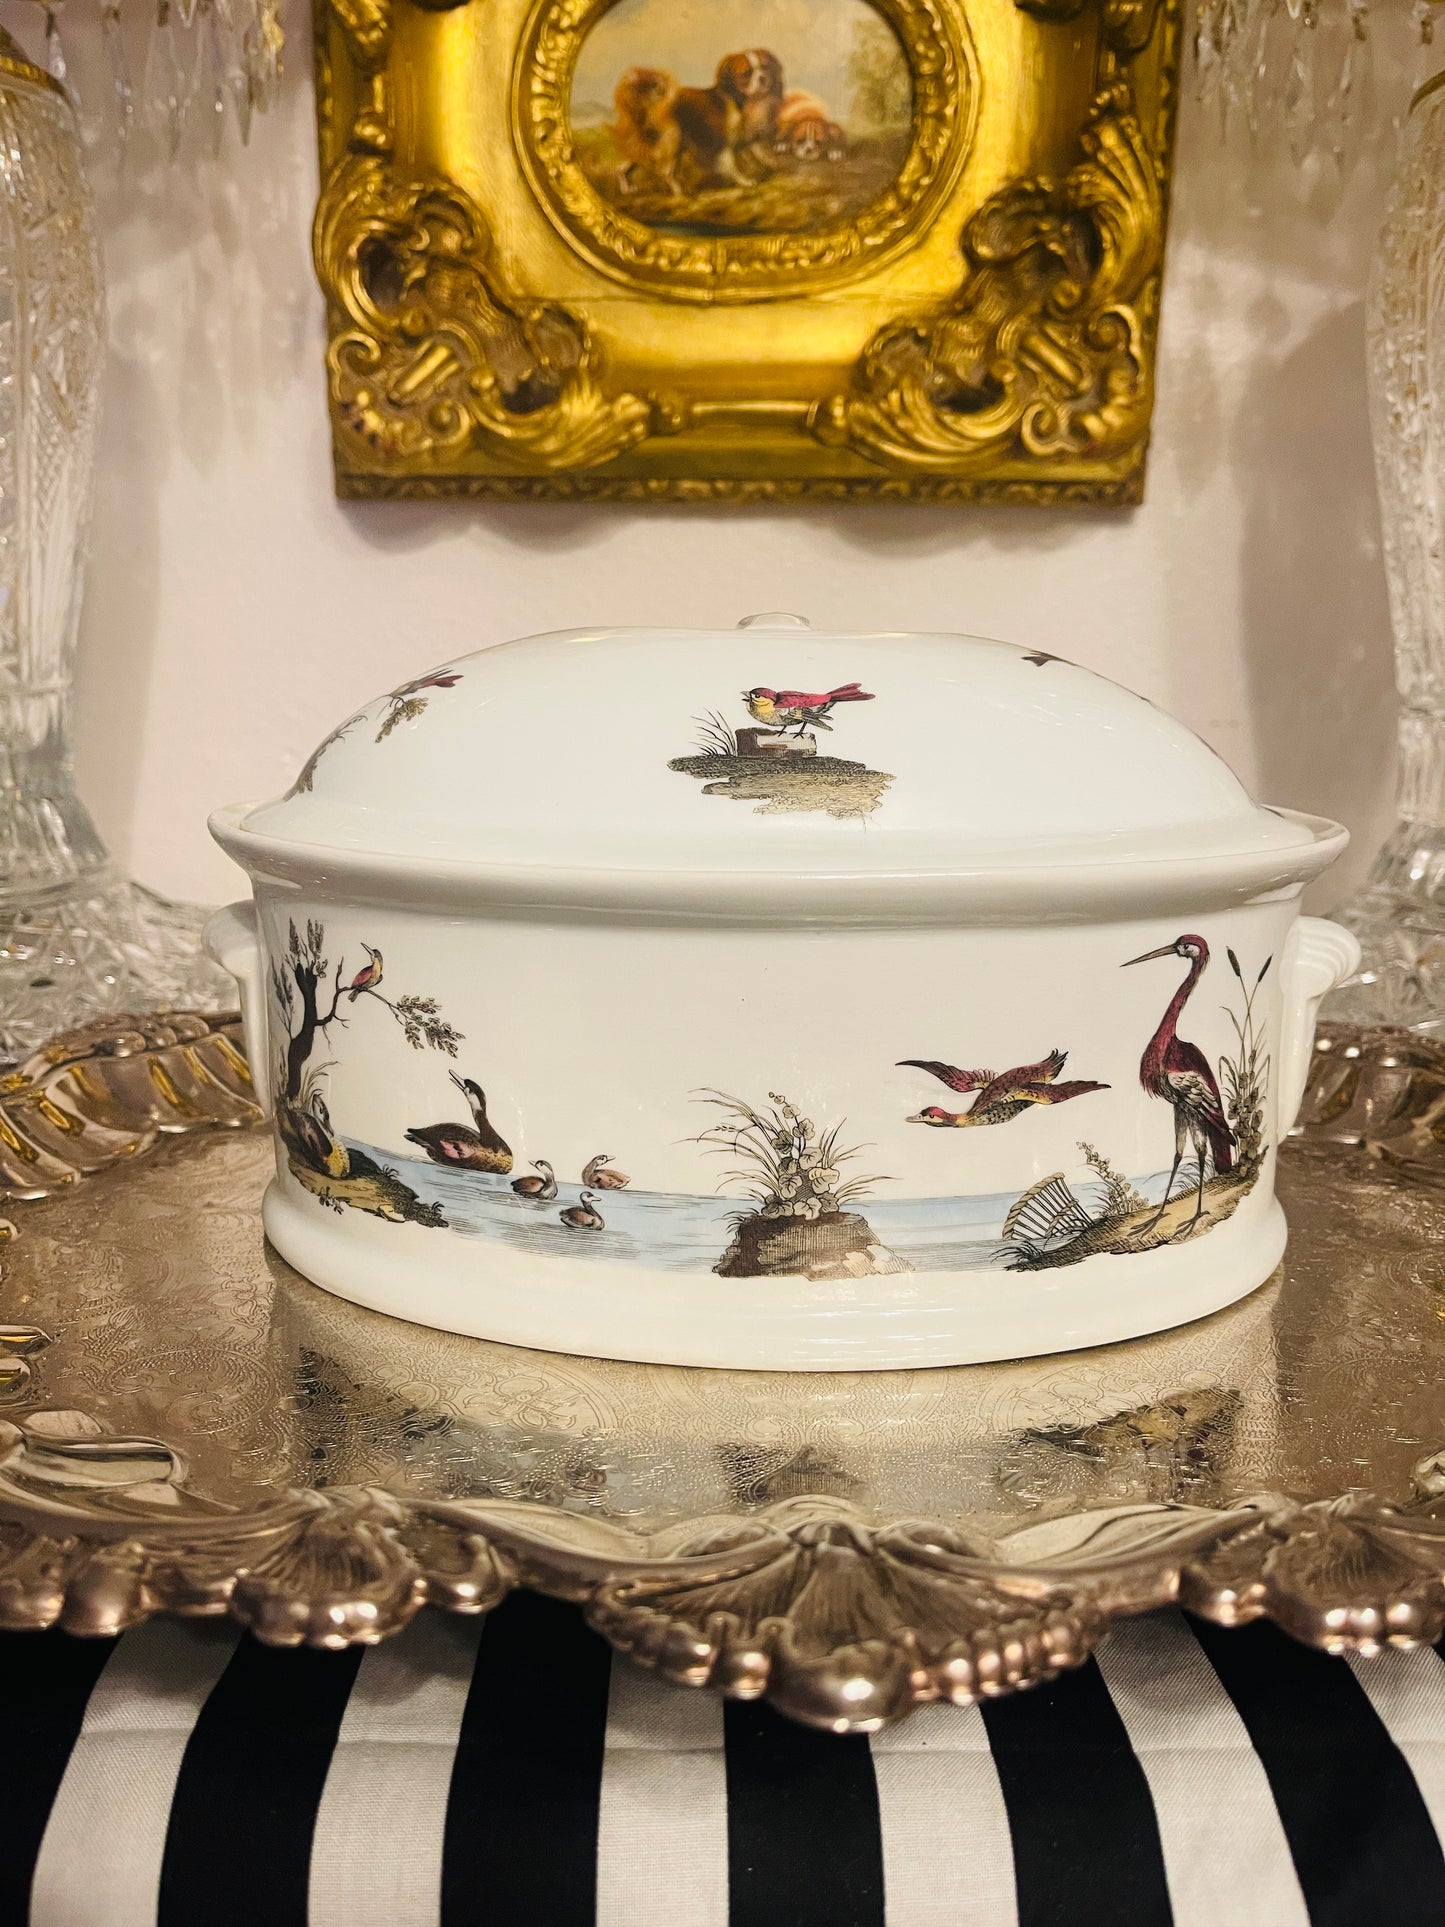 Louis Lourioux Covered Casserole, crafted in France for the Metropolitan Museum of Art